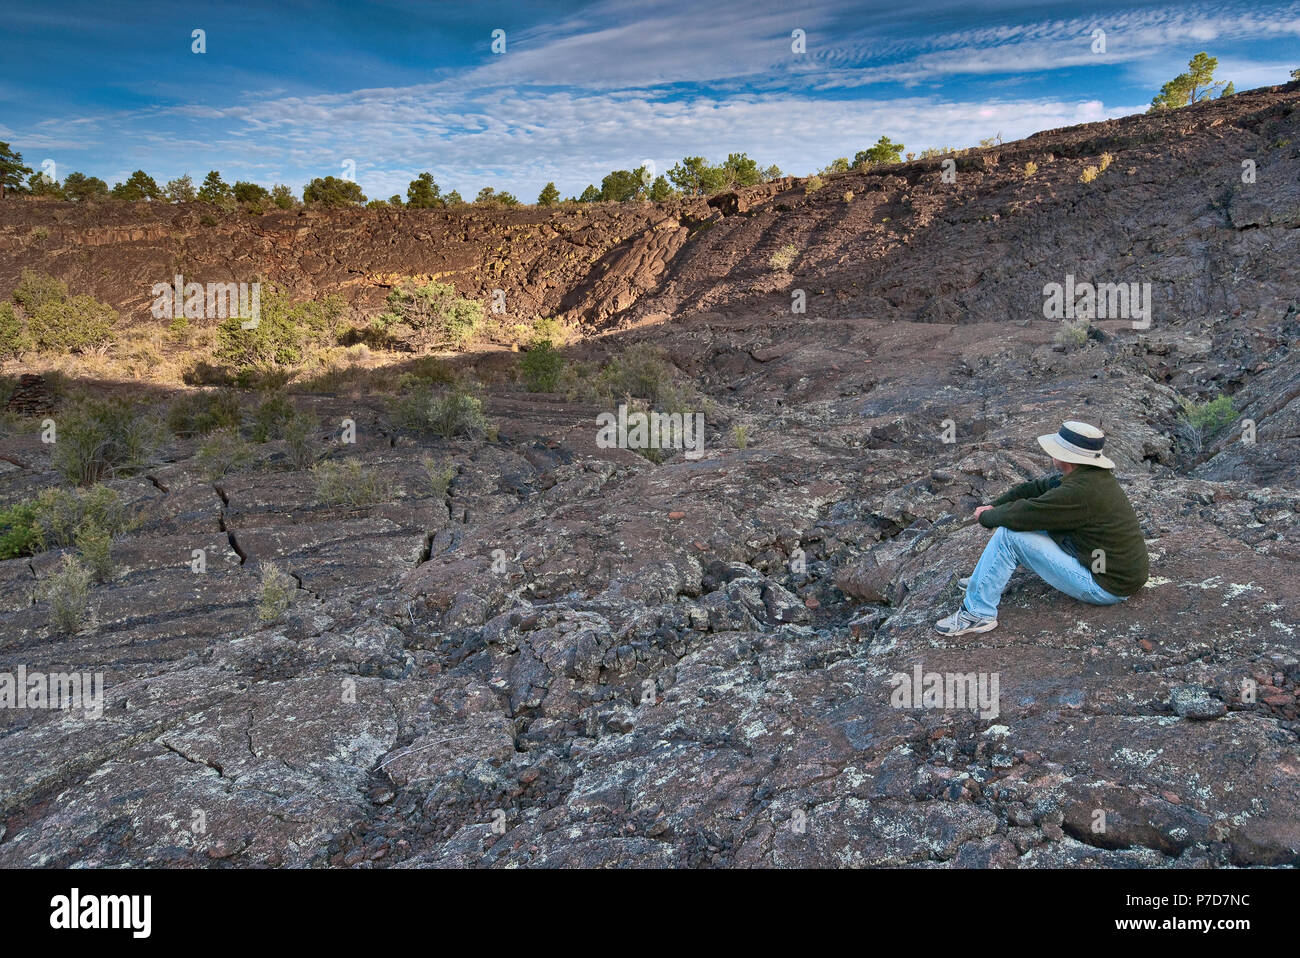 Hiker at volcanic Natural Amphitheater in Lava Falls Area at sunrise, El Malpais National Monument, New Mexico, USA Stock Photo